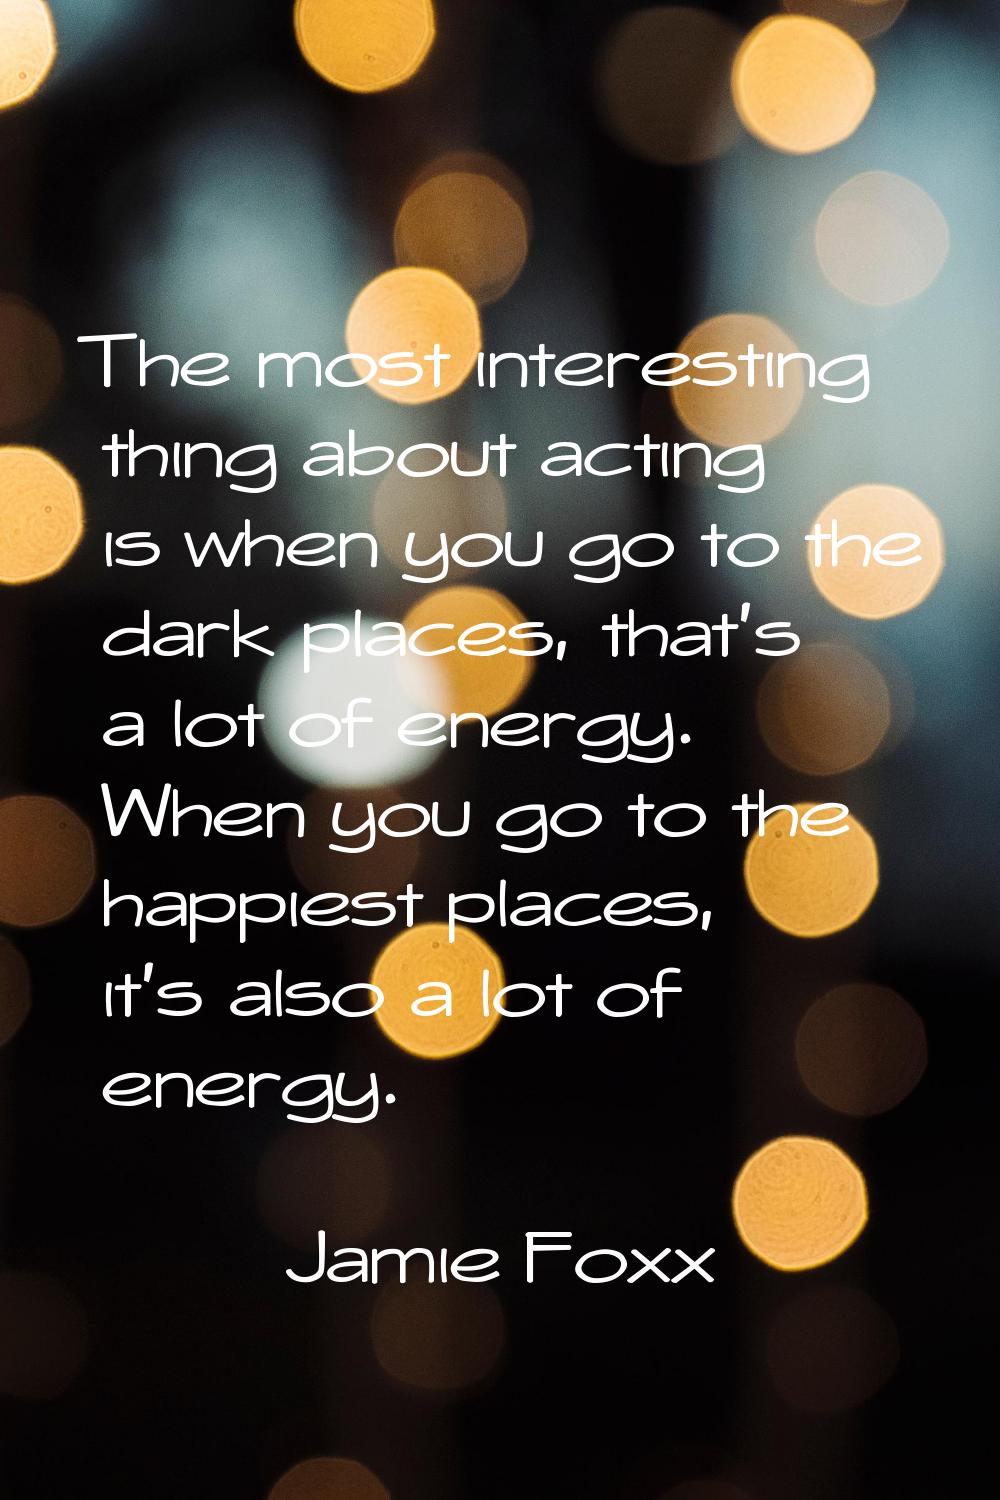 The most interesting thing about acting is when you go to the dark places, that's a lot of energy. 